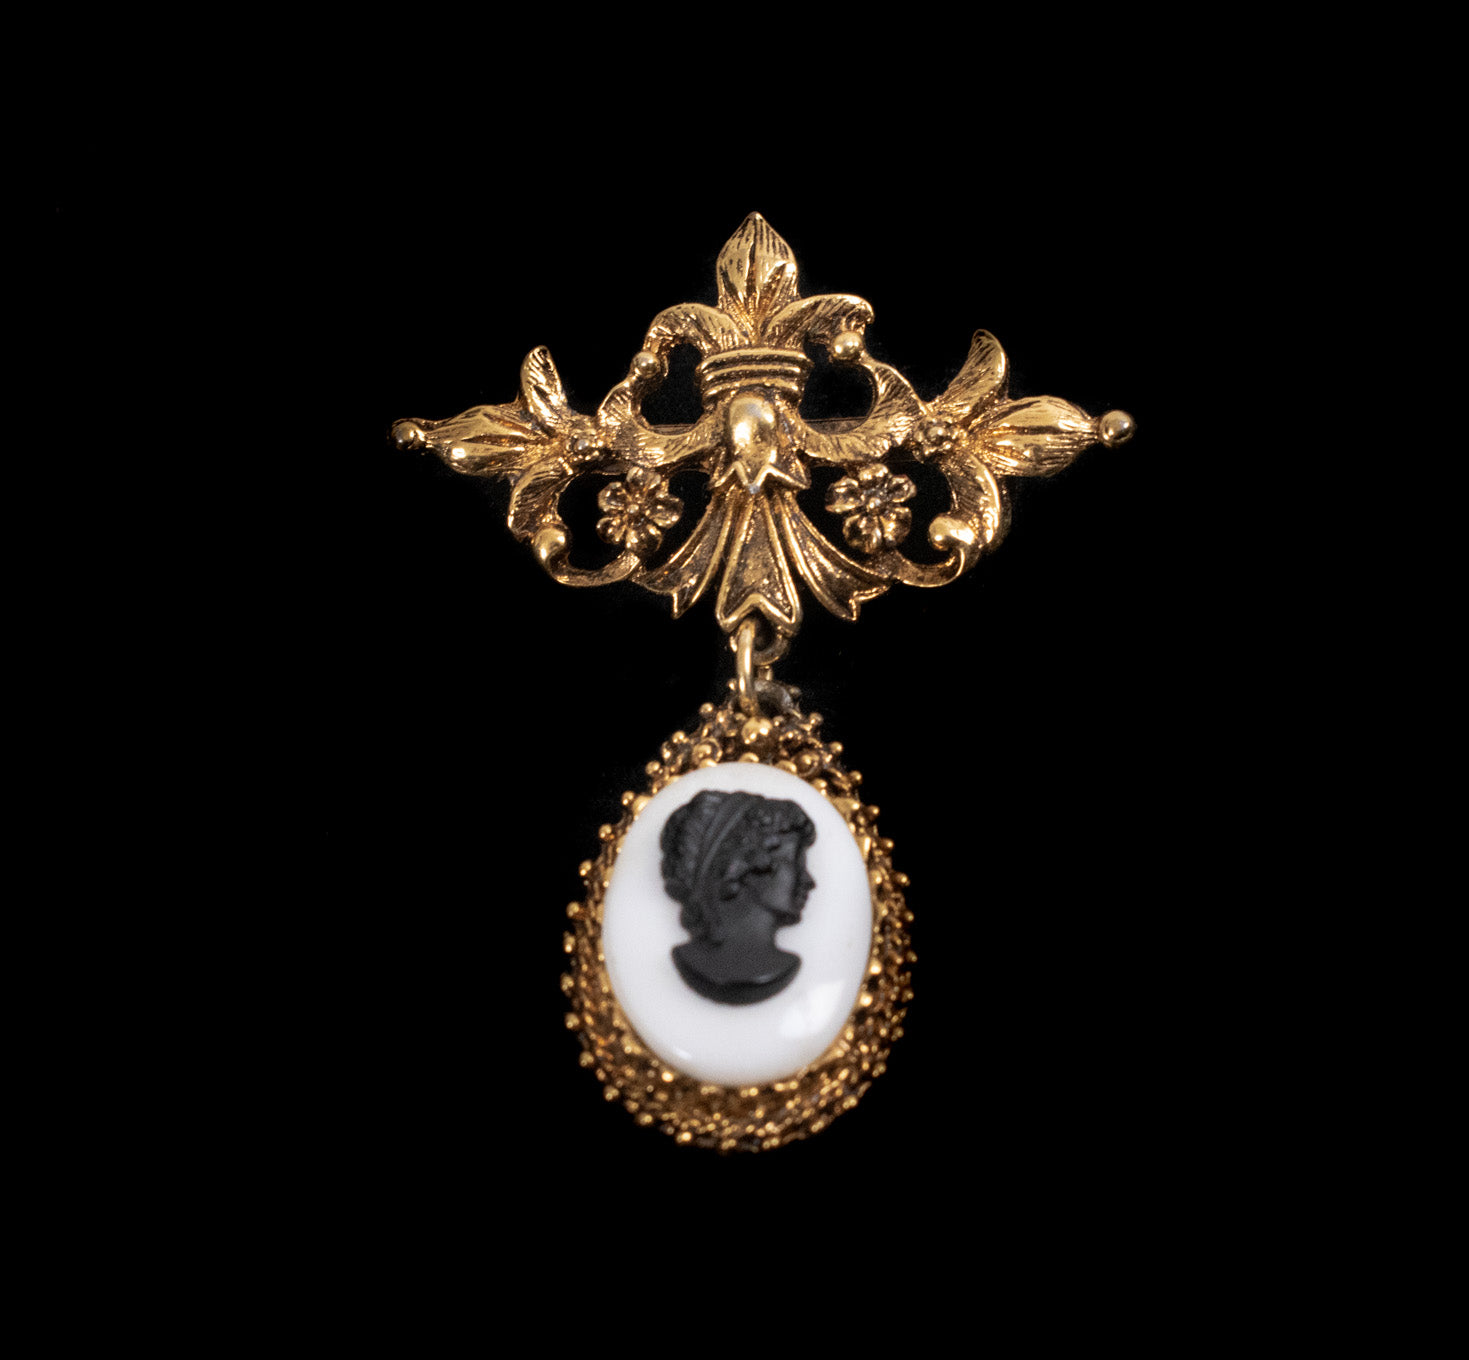 Brooch Pin Vintage Gold Pin Victorian Portrait Display Pendent Hanging Pin